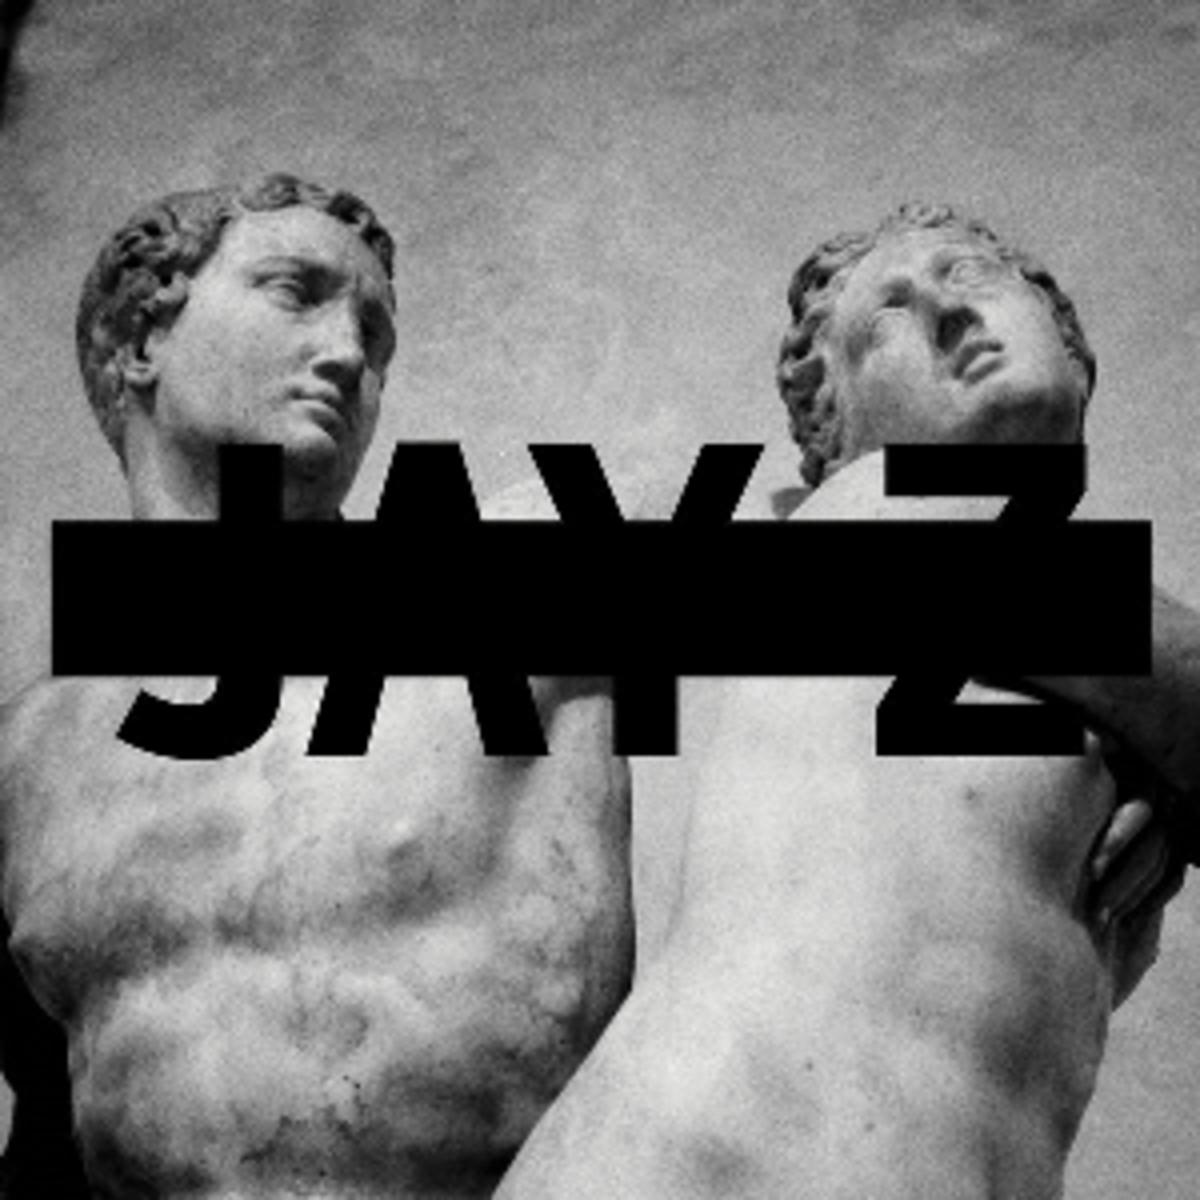 Magna Carta Holy Grail is Jay-Z's newest album. It sold over 528,000 copies in the first week and has gone double platinum in the U.S.